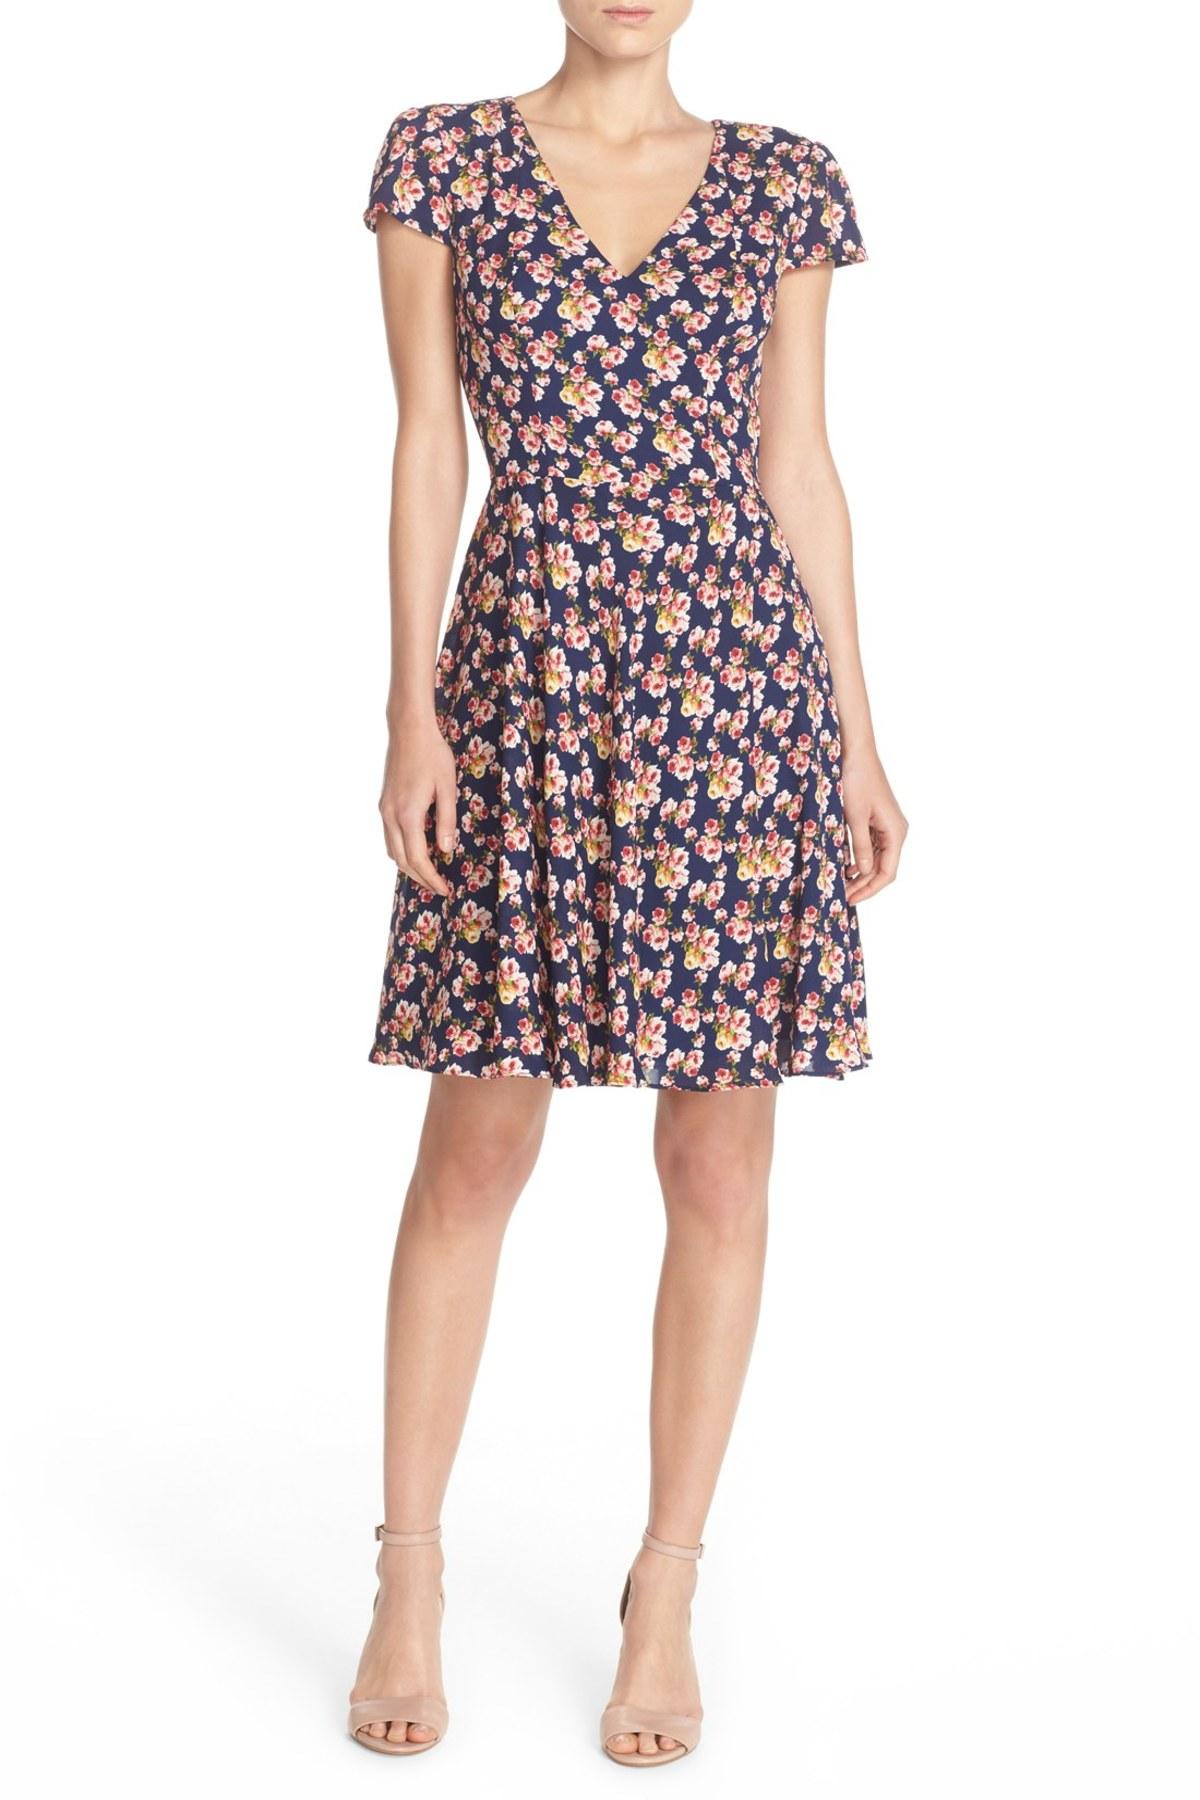 Lyst - Betsey Johnson Floral Mini Dress in Blue